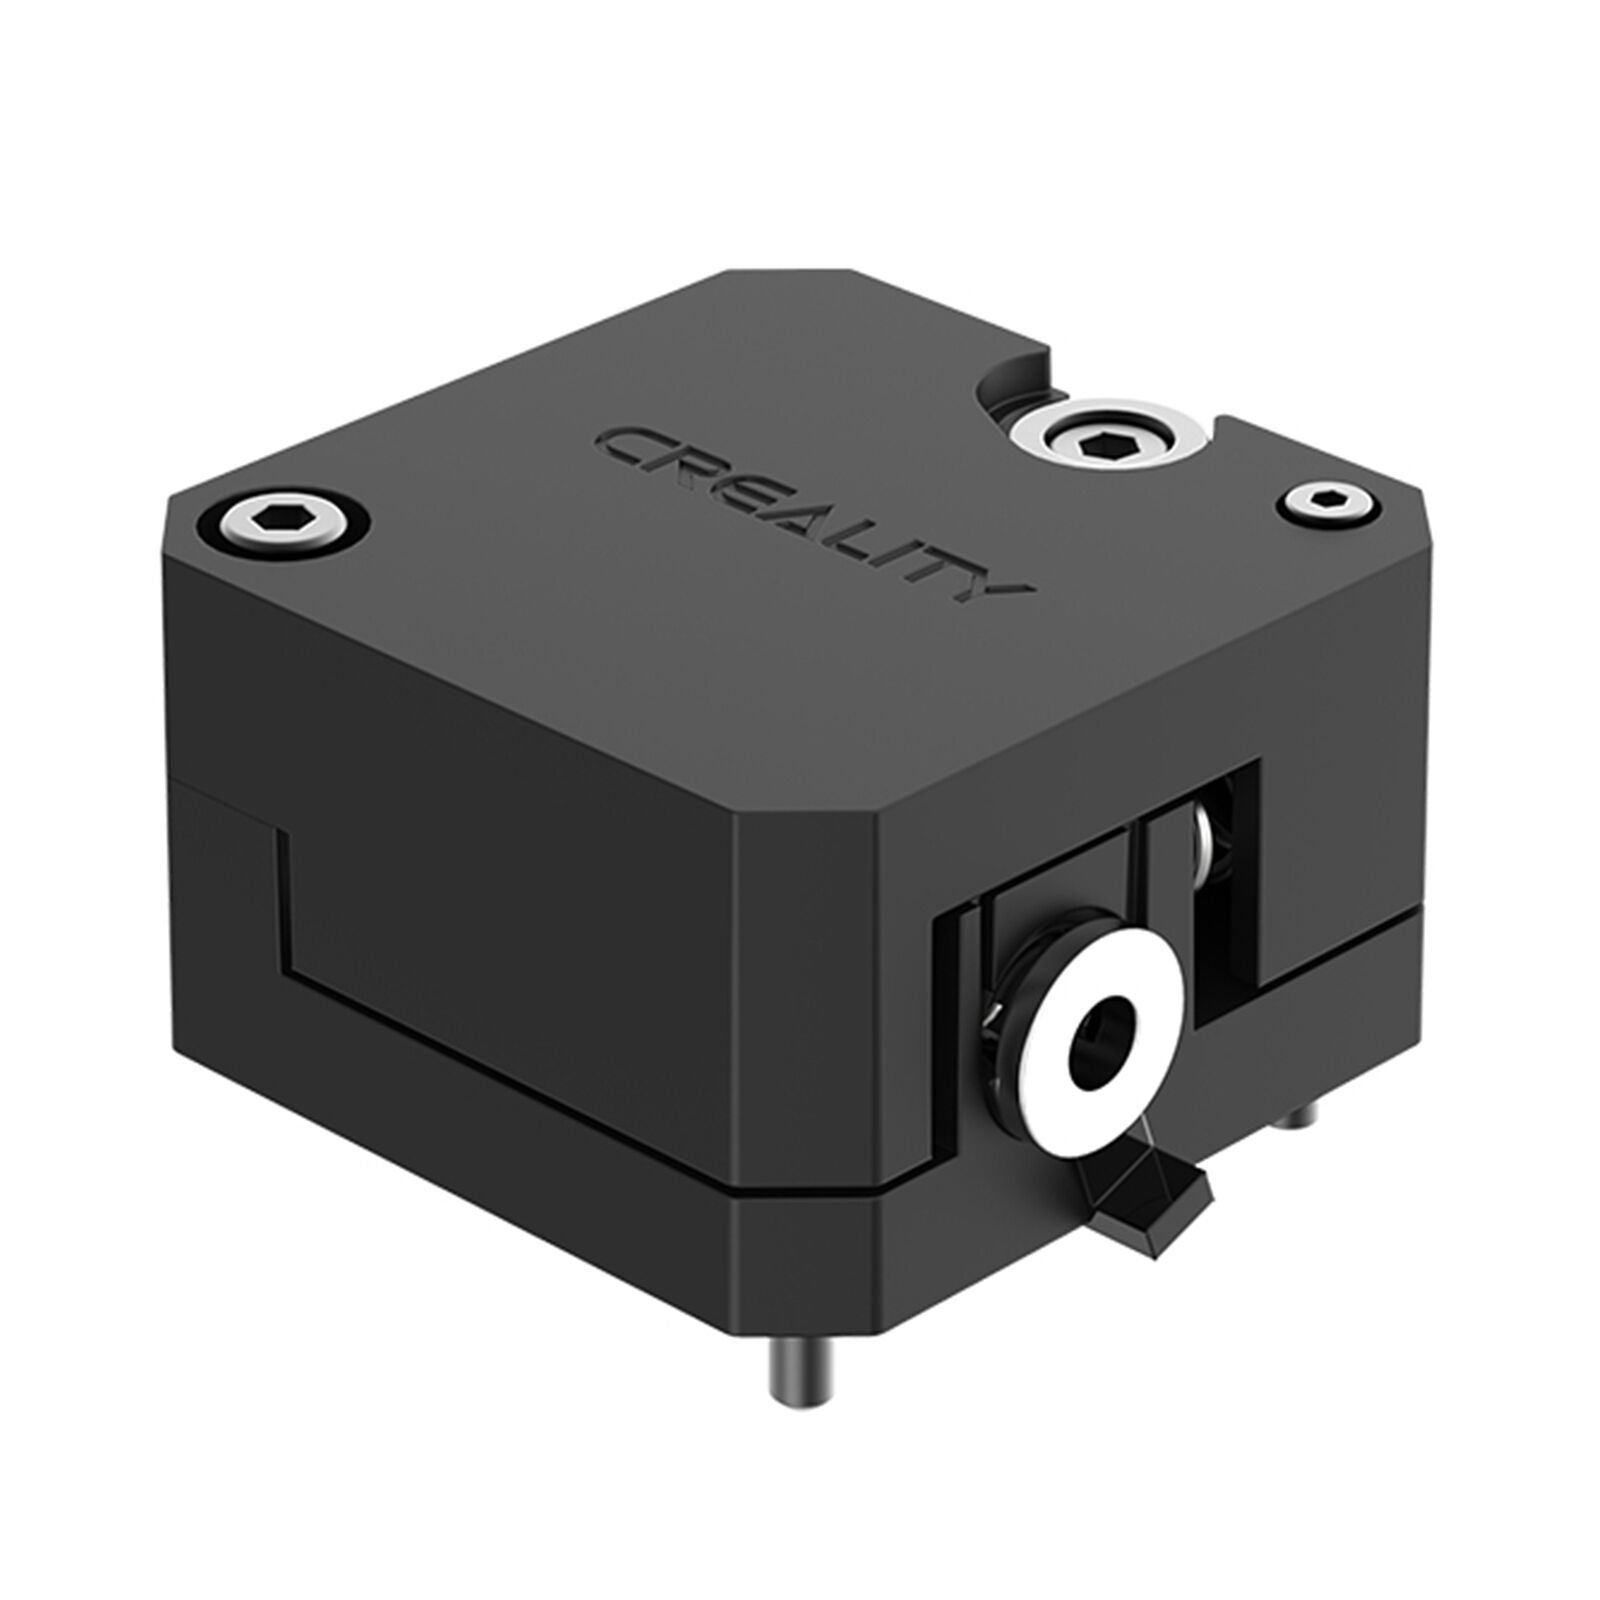 Creality 3D® CR-6 SE/CR-6 MAX Extruder for 1.75mm Filament